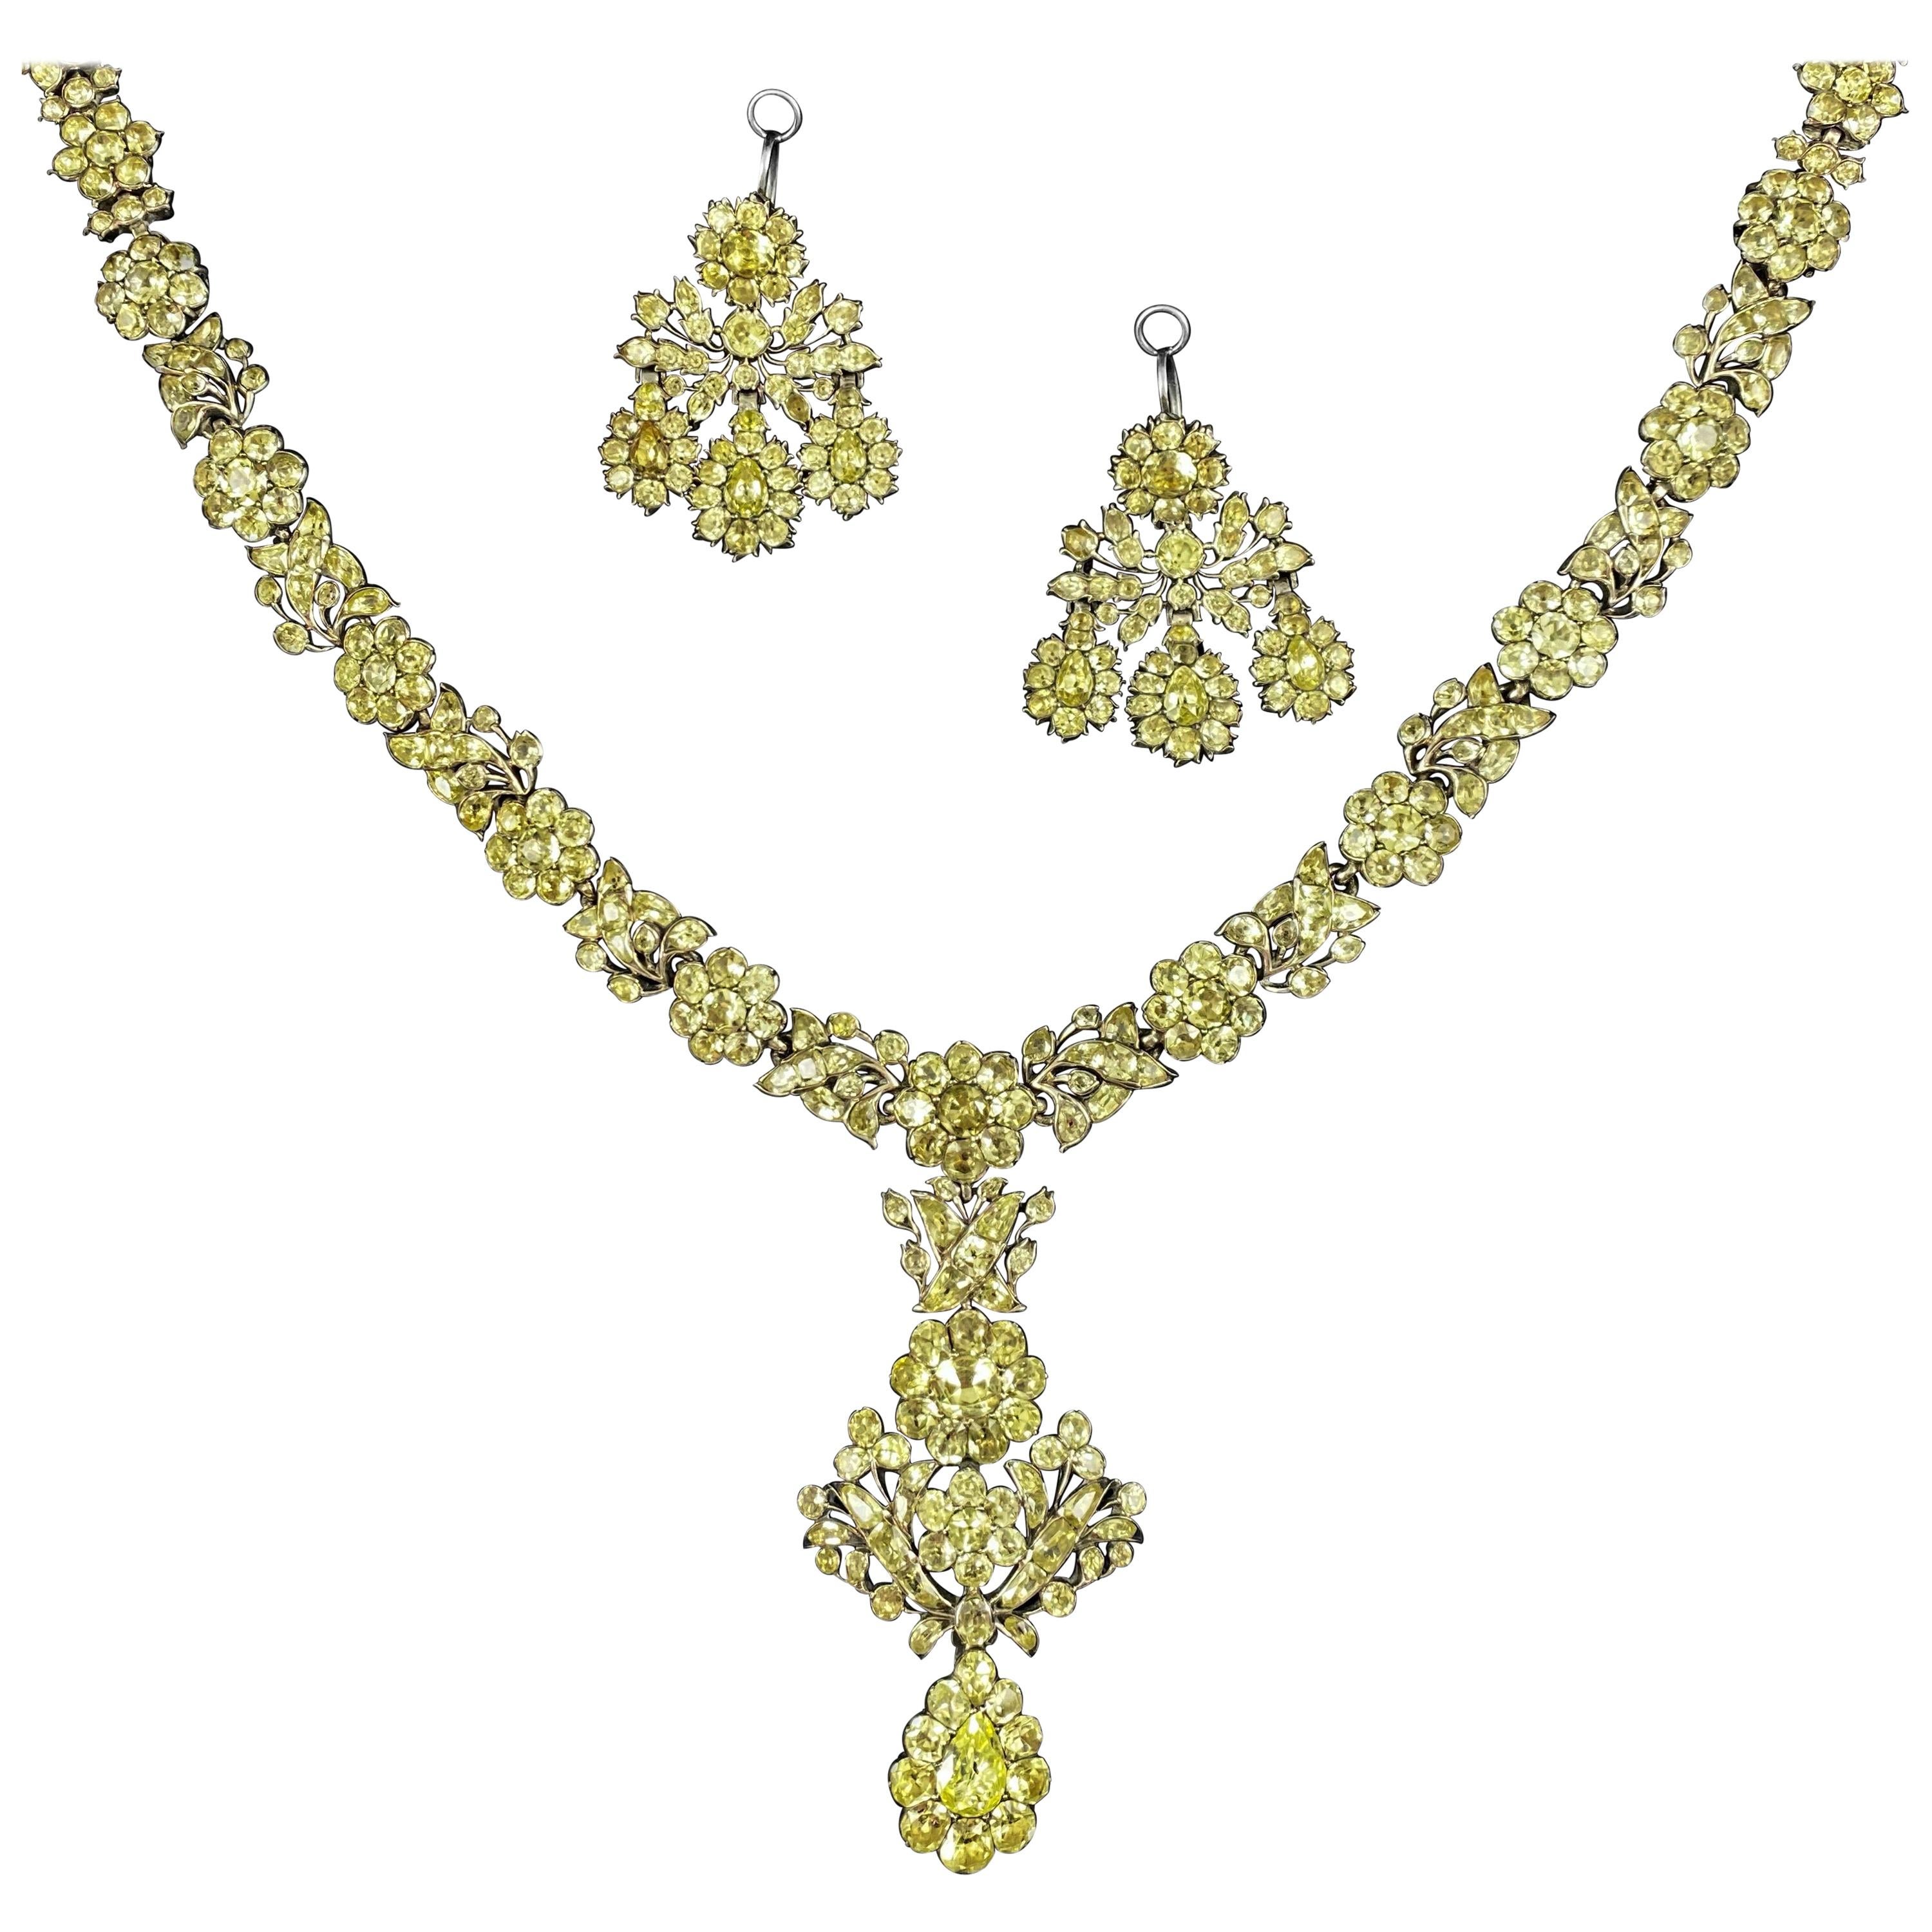 Stunning Early Victorian Chrysoberyl Necklace For Sale at 1stDibs